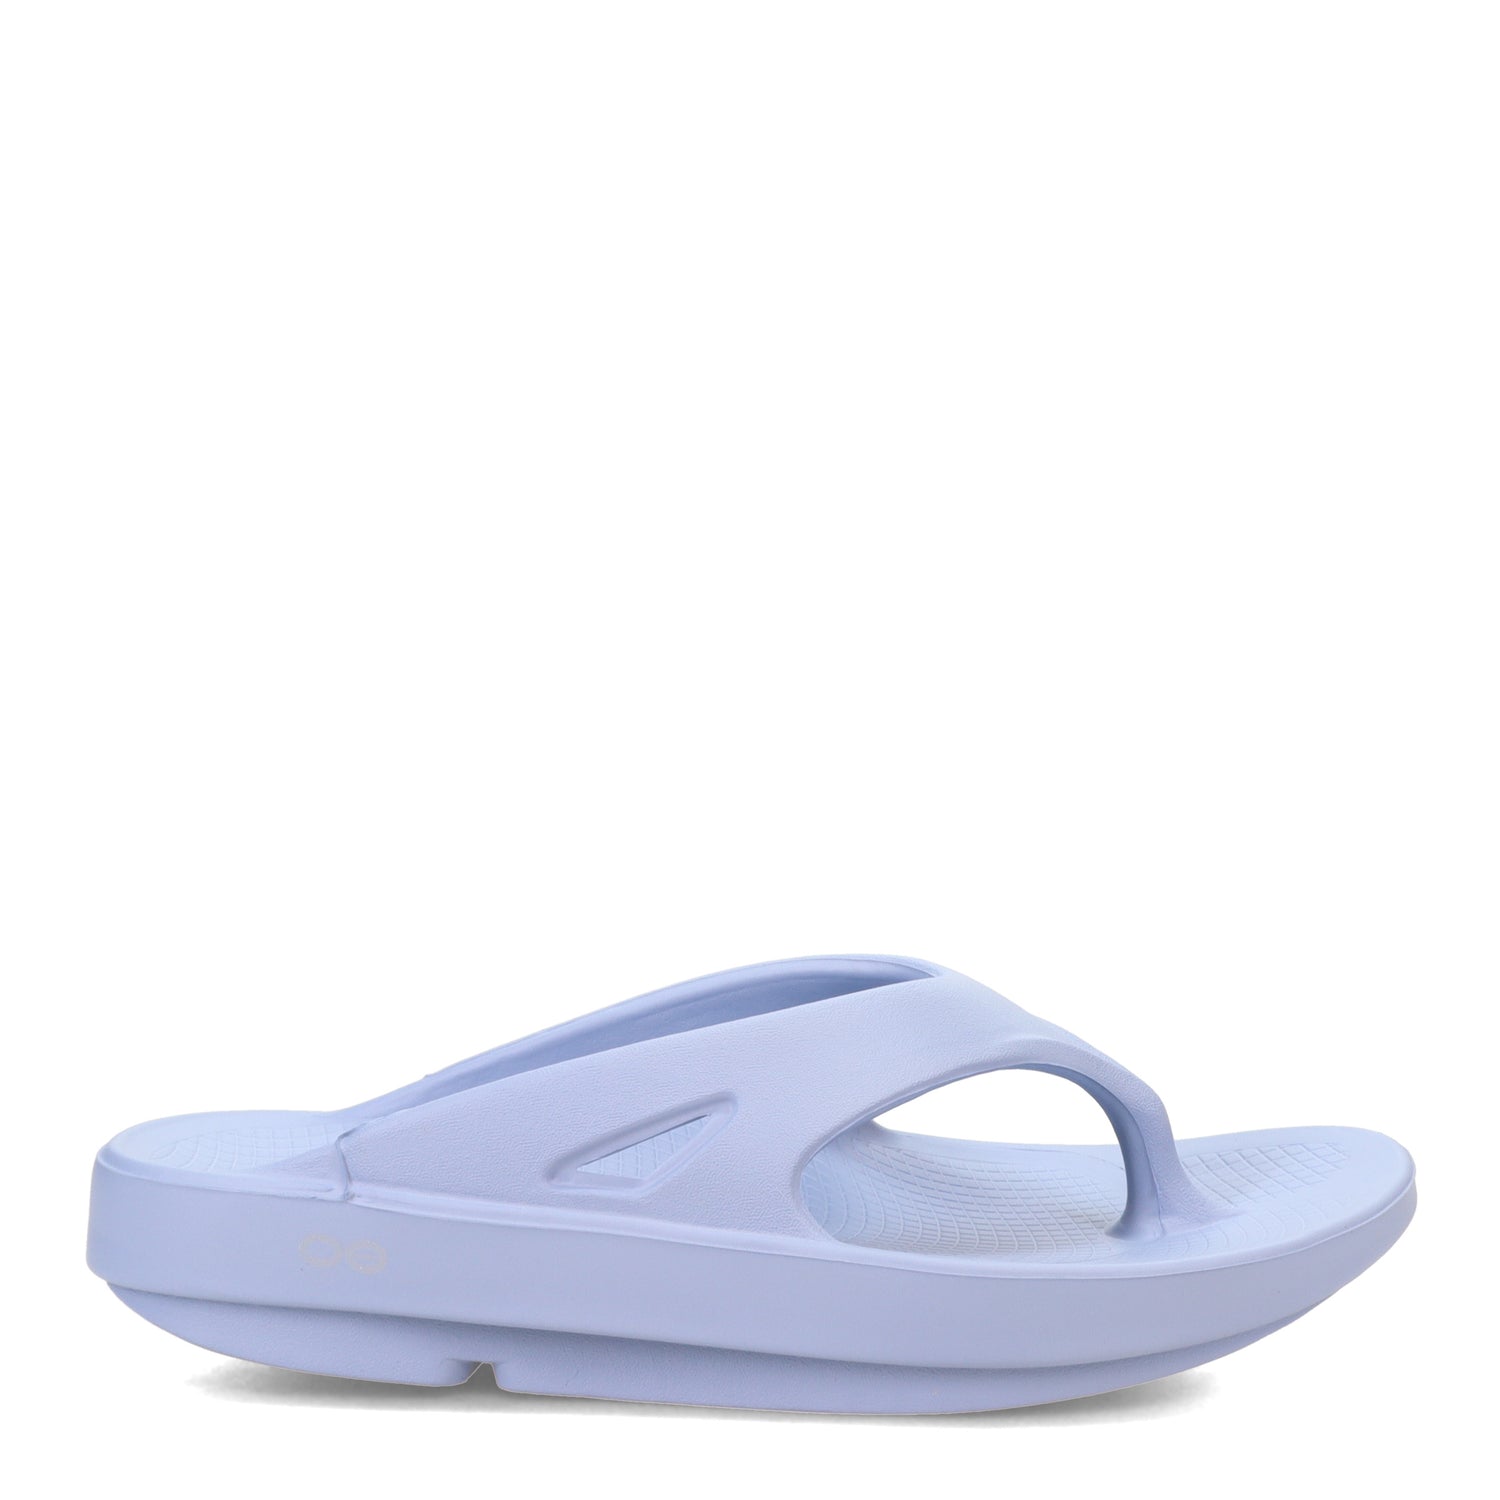 Oofos 1000 Ooriginal Thong Unisex Sandals - Shippy Shoes